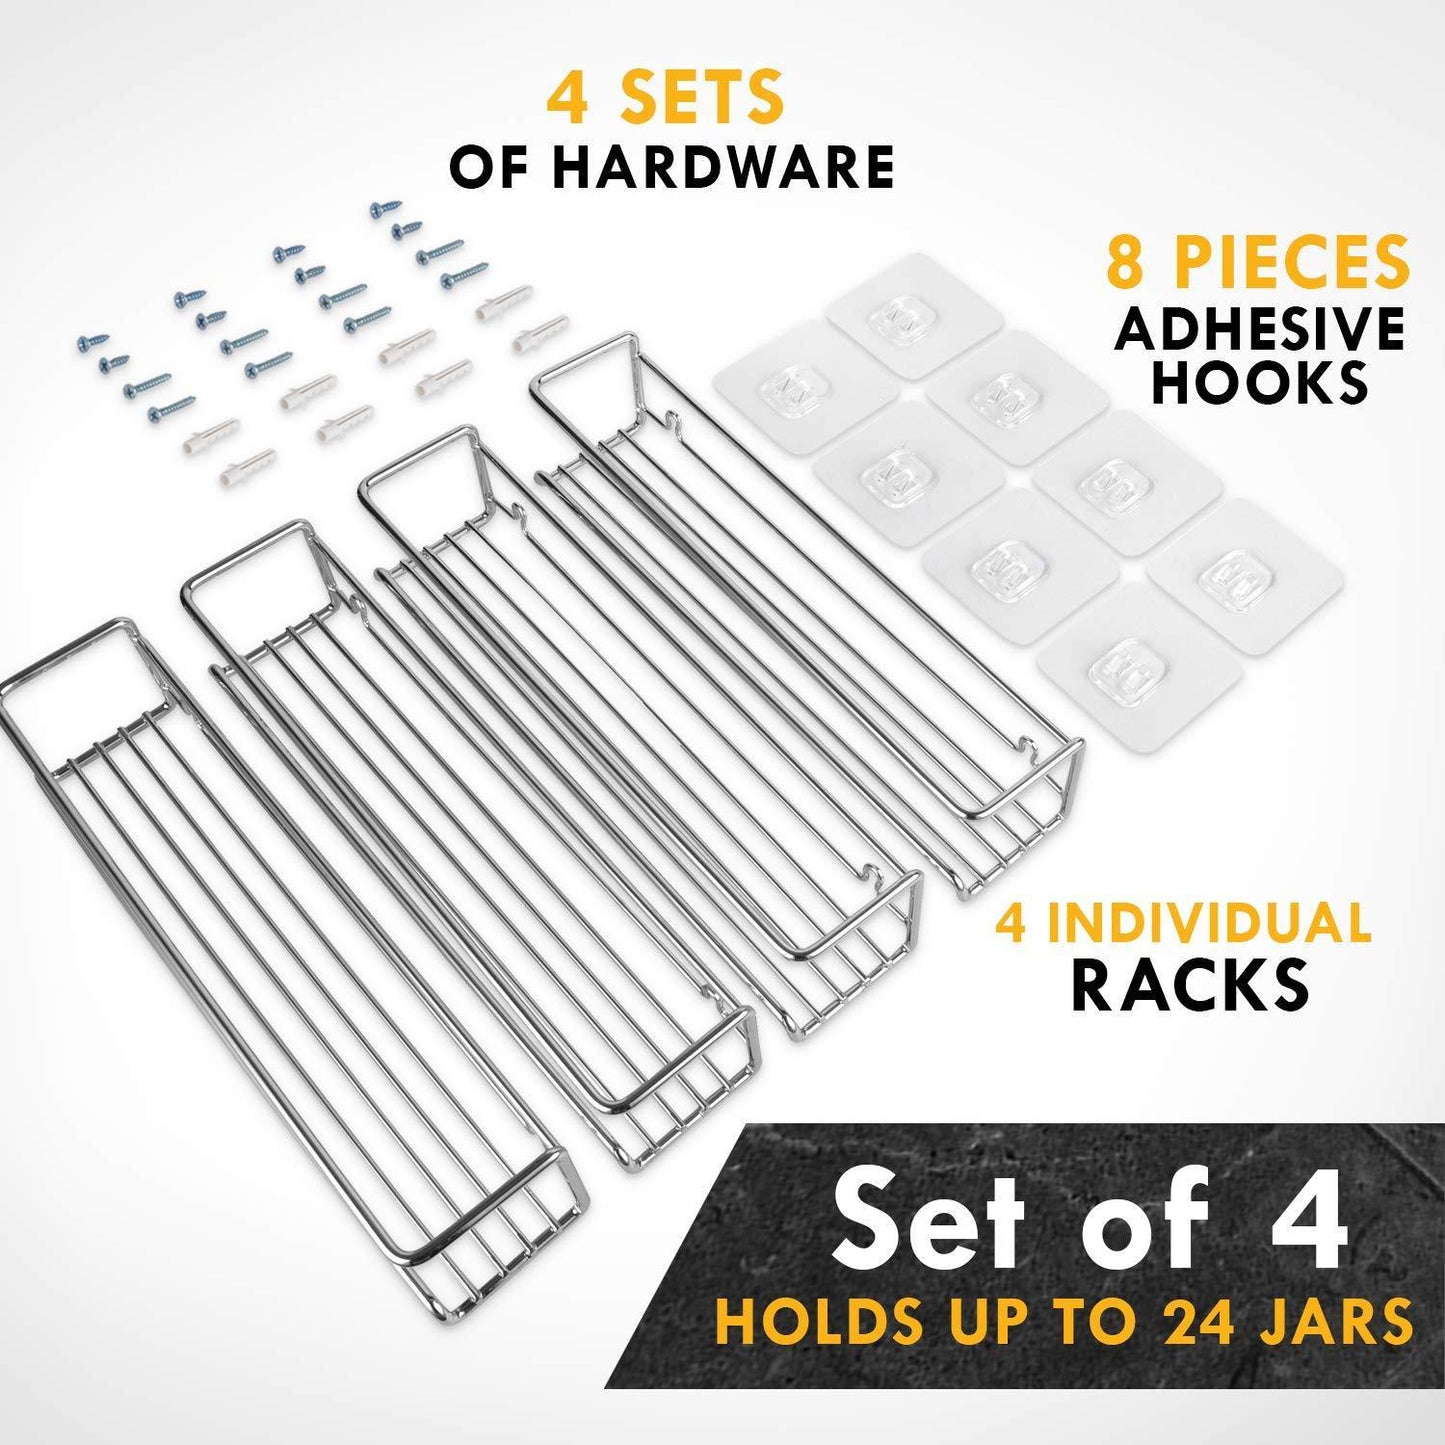 Save spice rack organizer for cabinet door mount or wall mounted set of 4 chrome tiered hanging shelf for spice jars storage in cupboard kitchen or pantry display bottles on shelves in cabinets